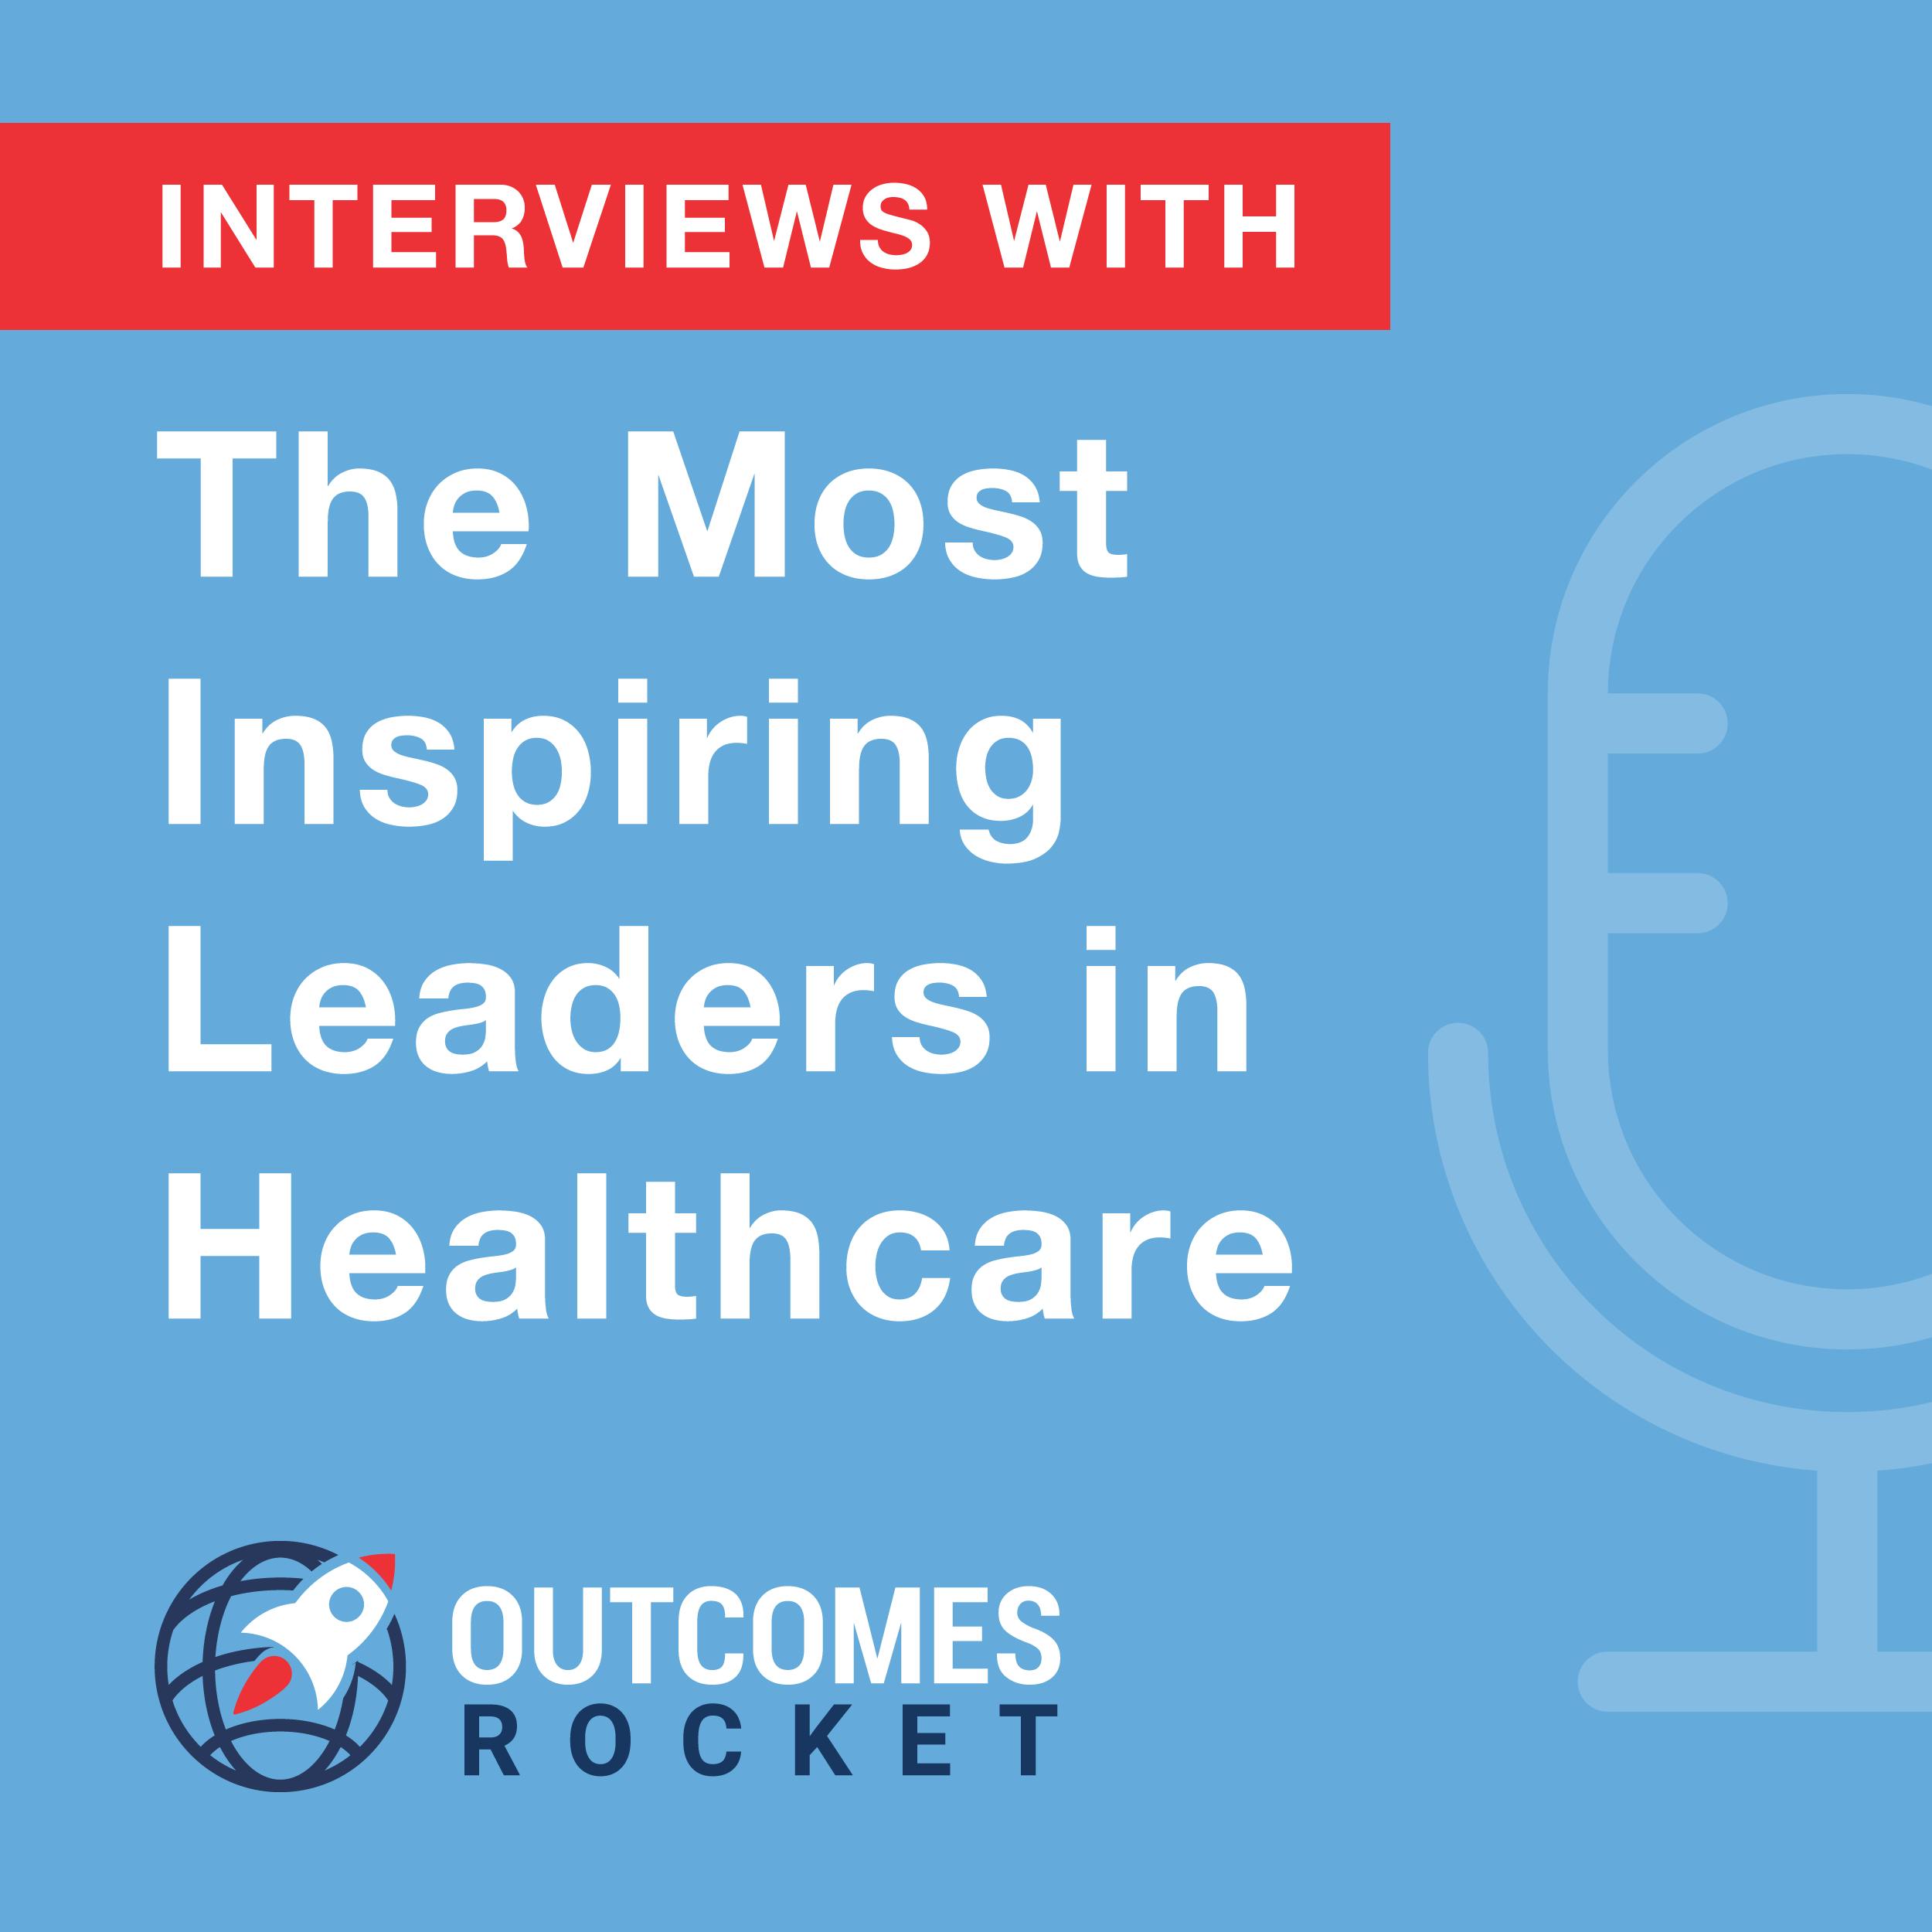 How to Build a Flexible Culture in Health without Compromising Values with Drex DeFord, Indie Healthcare IT Consultant